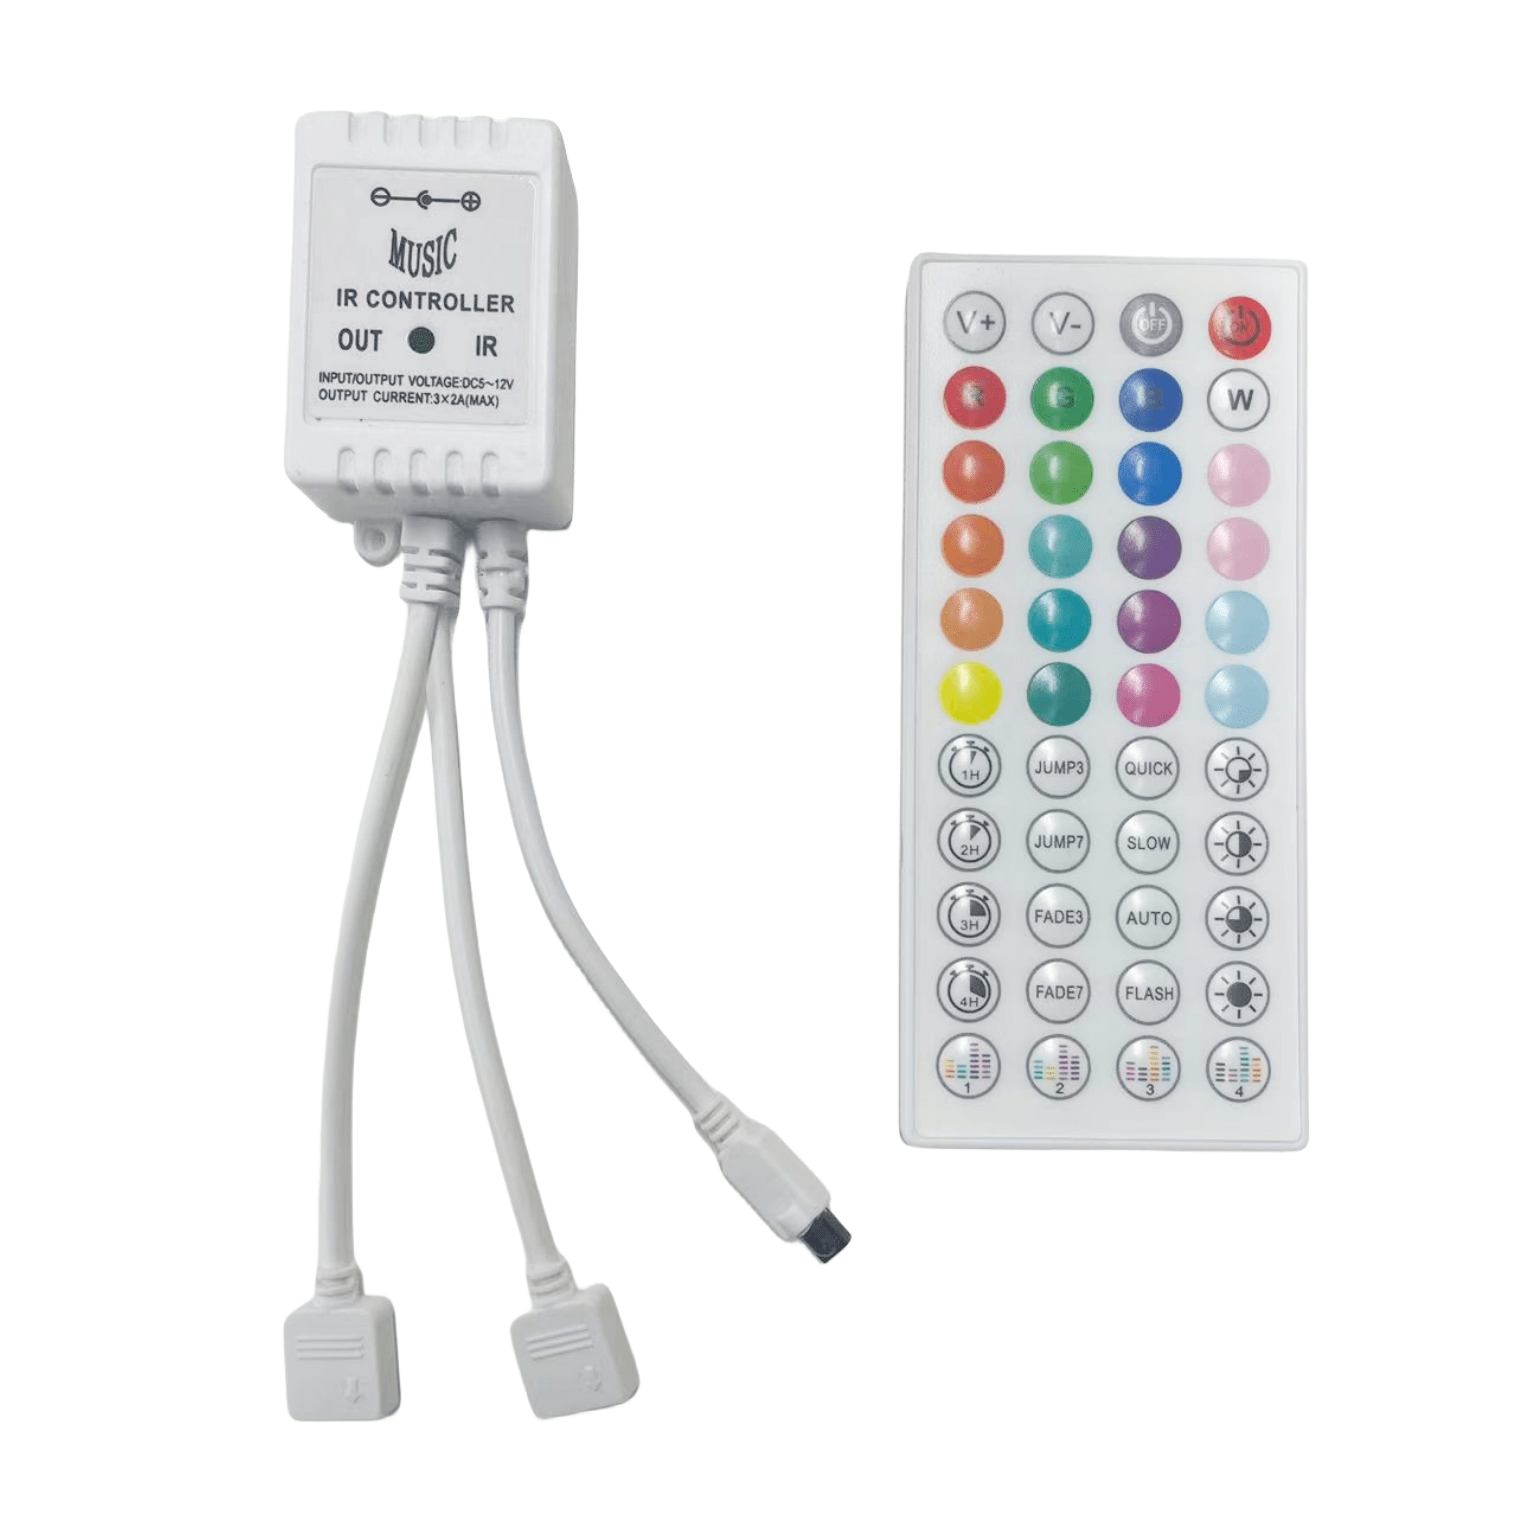 1pc led light strip 44 key music remote control with music controller suitable for 4 pin led light strip plug and play details 0